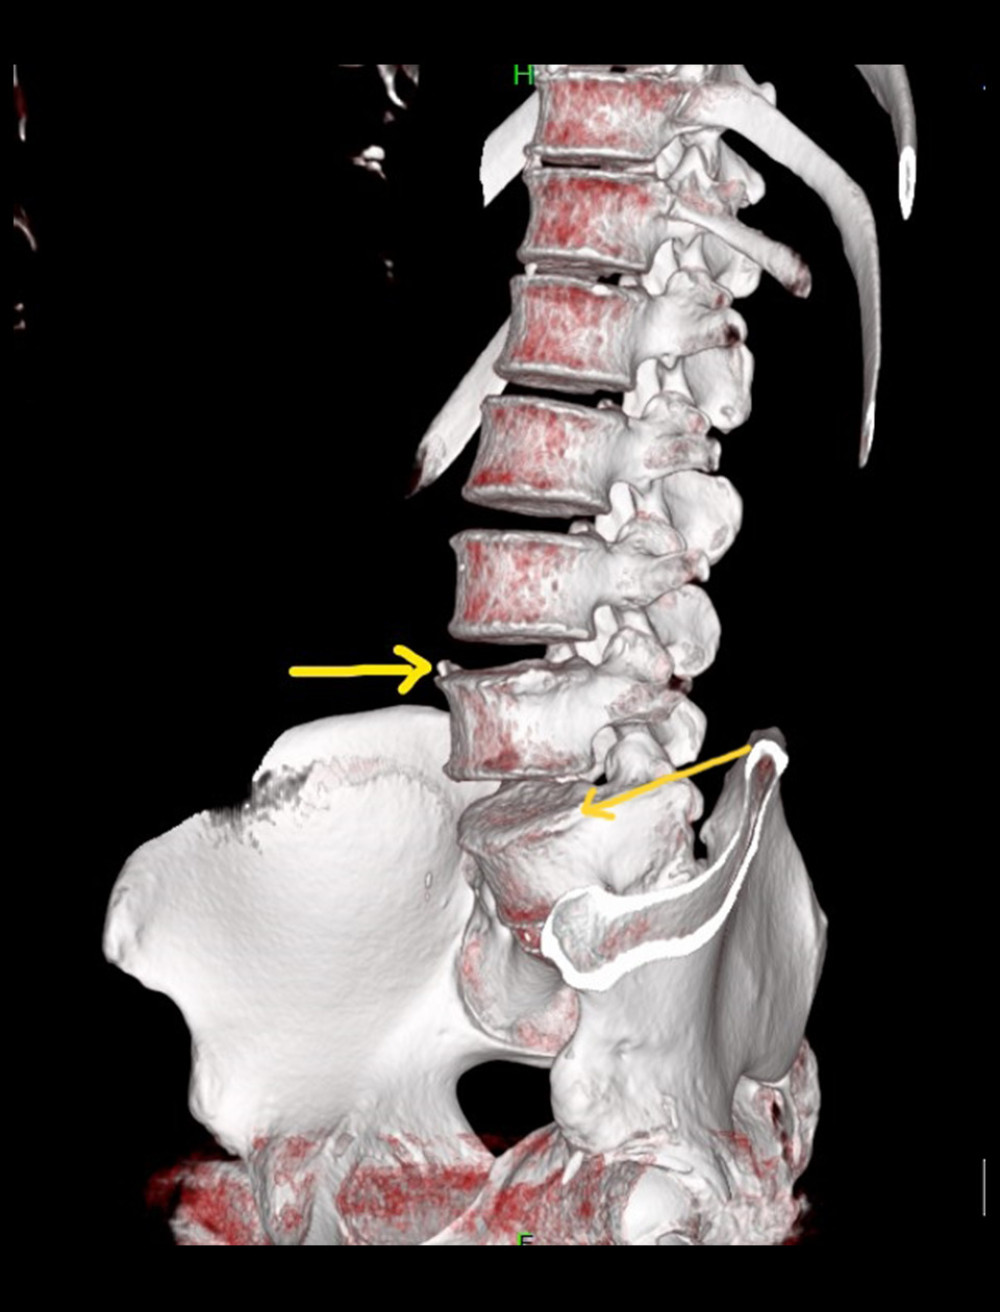 Sagittal view non-contrast CT scan of the lumbar spine using volume rendering technique (VRT) showing syndesmophytes over L4 and L5 vertebrae (yellow arrows).